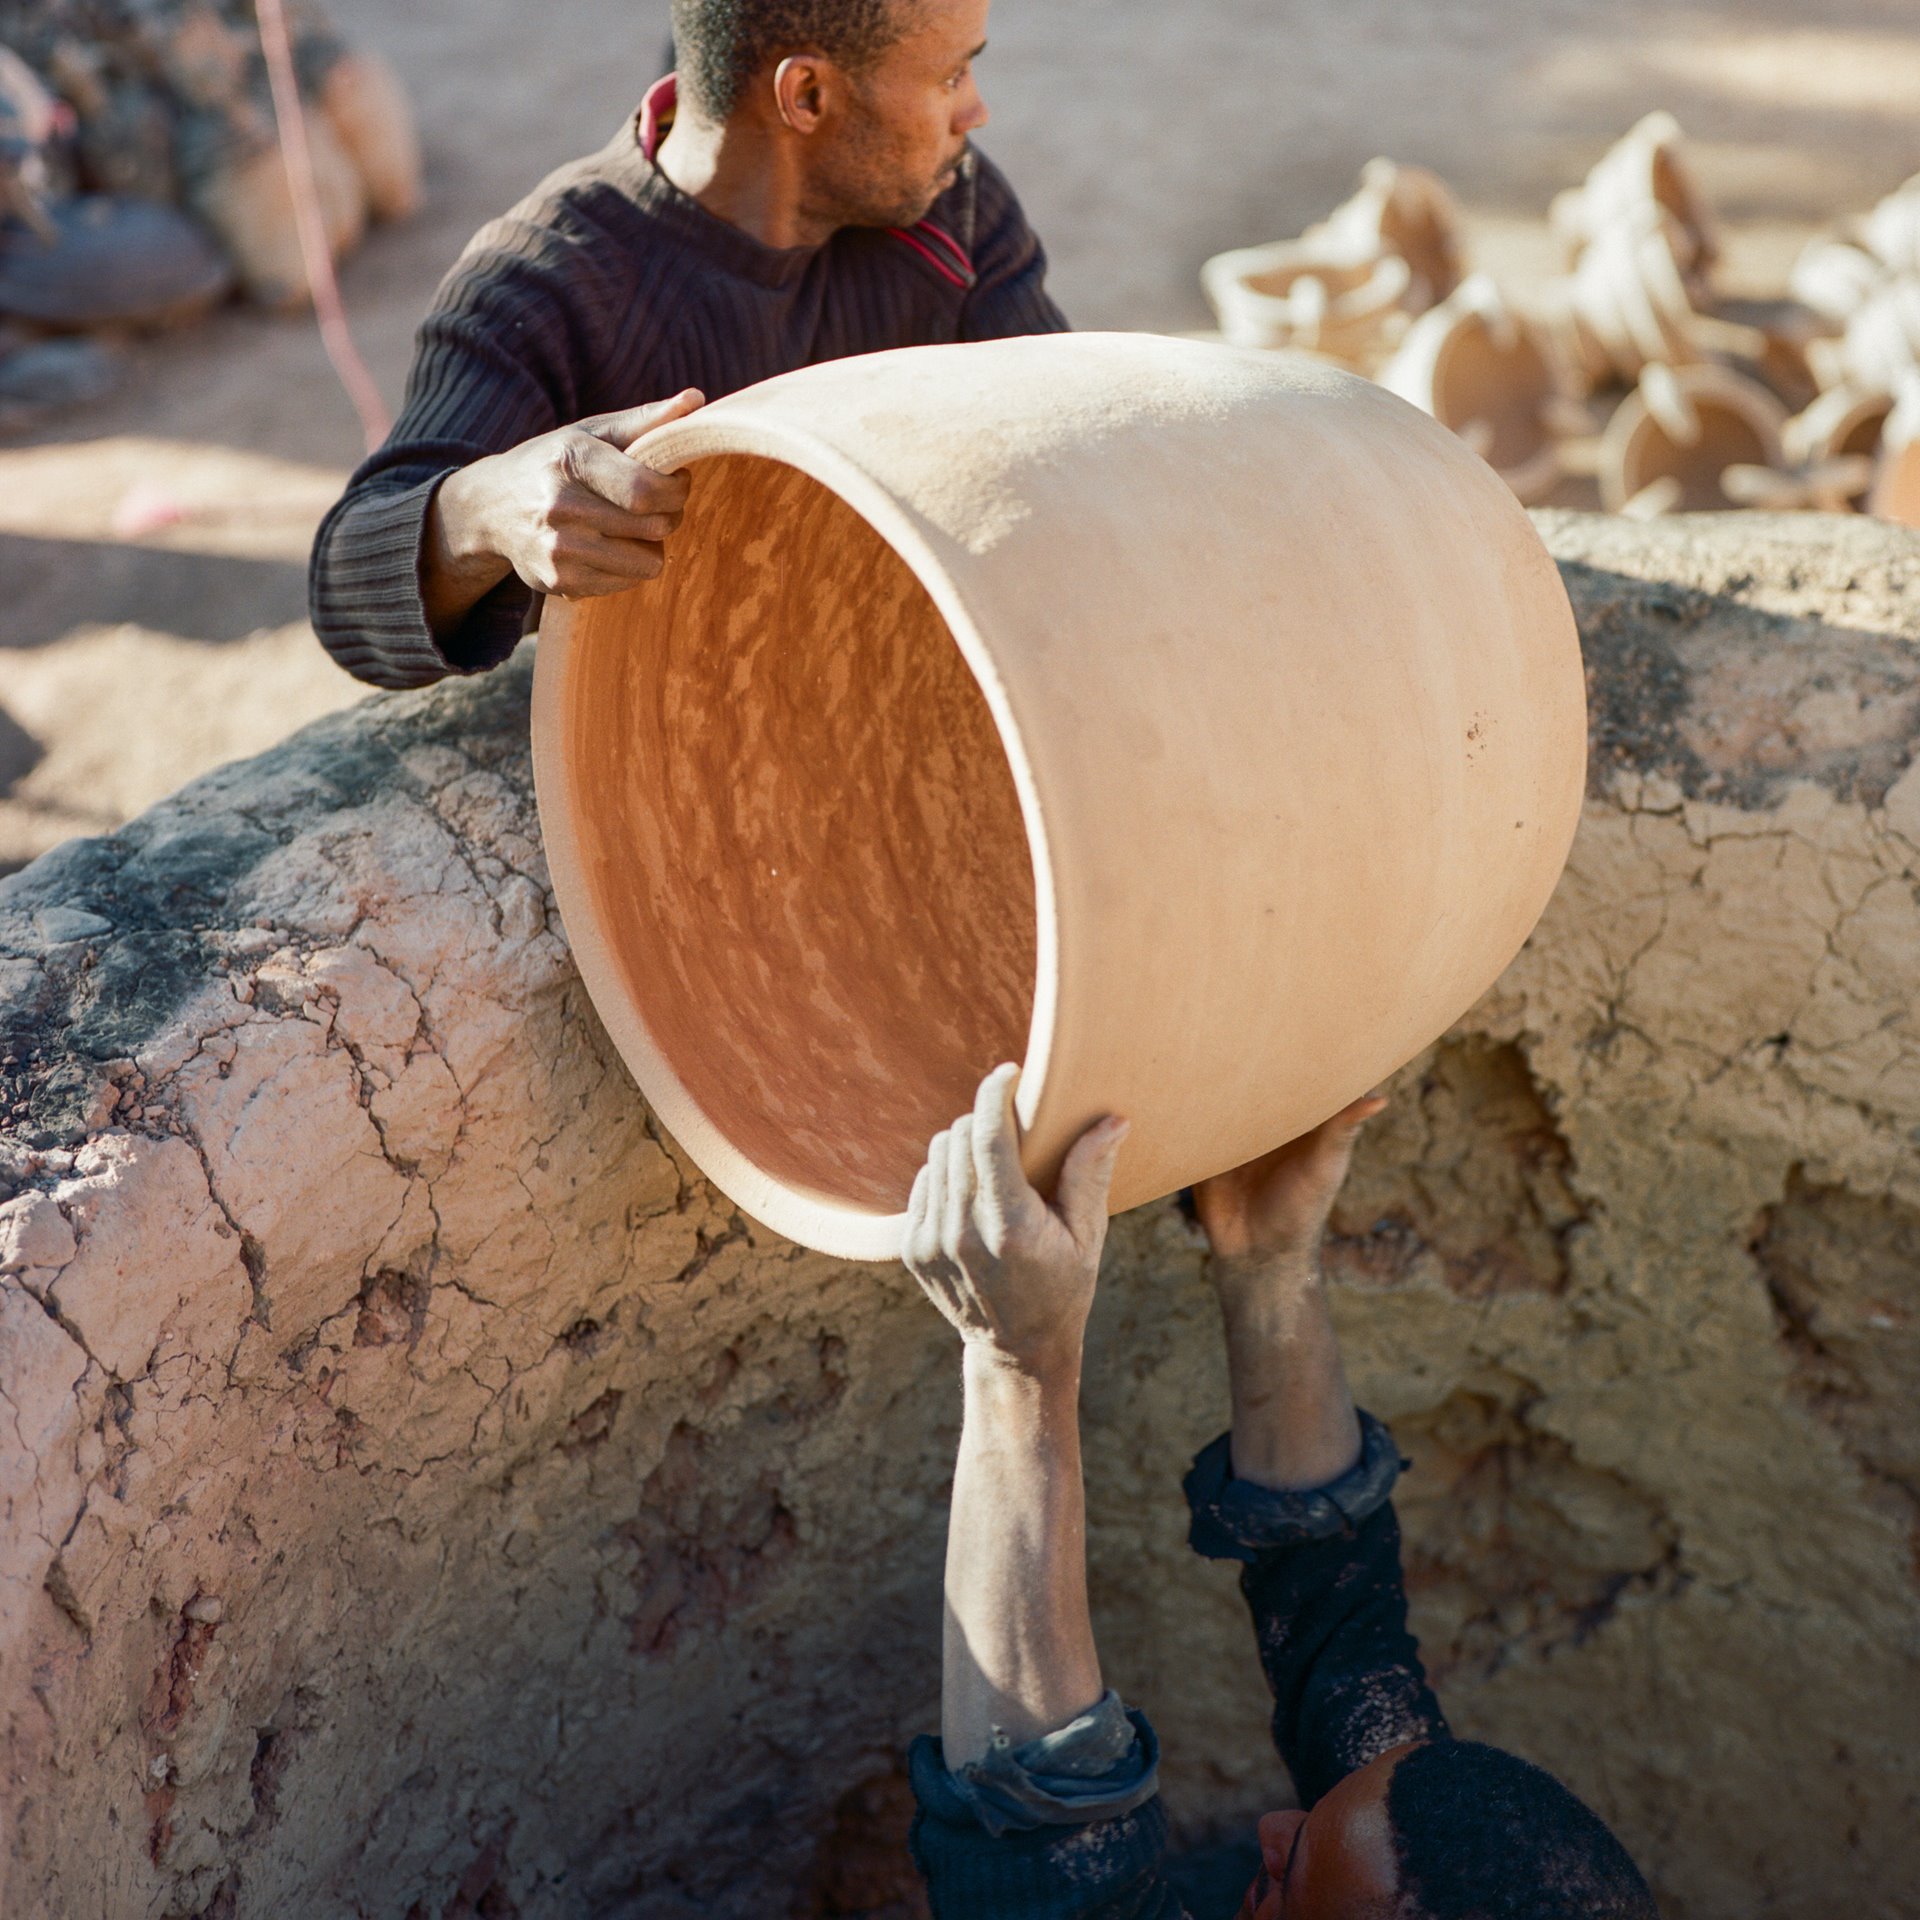 Aziz Elfakhar (left) hands a pot to his brother Mohammed to place in their kiln for firing, at the Skoura Oasis, in central Morocco. Mohammed says that when crops are poor, fewer people come to barter produce for pots. He prefers bartering as a way of doing business, as it means he does not have to go to the trouble and expense of transporting all his goods to a souk on market days, and waiting until he has sold them before he can buy food.